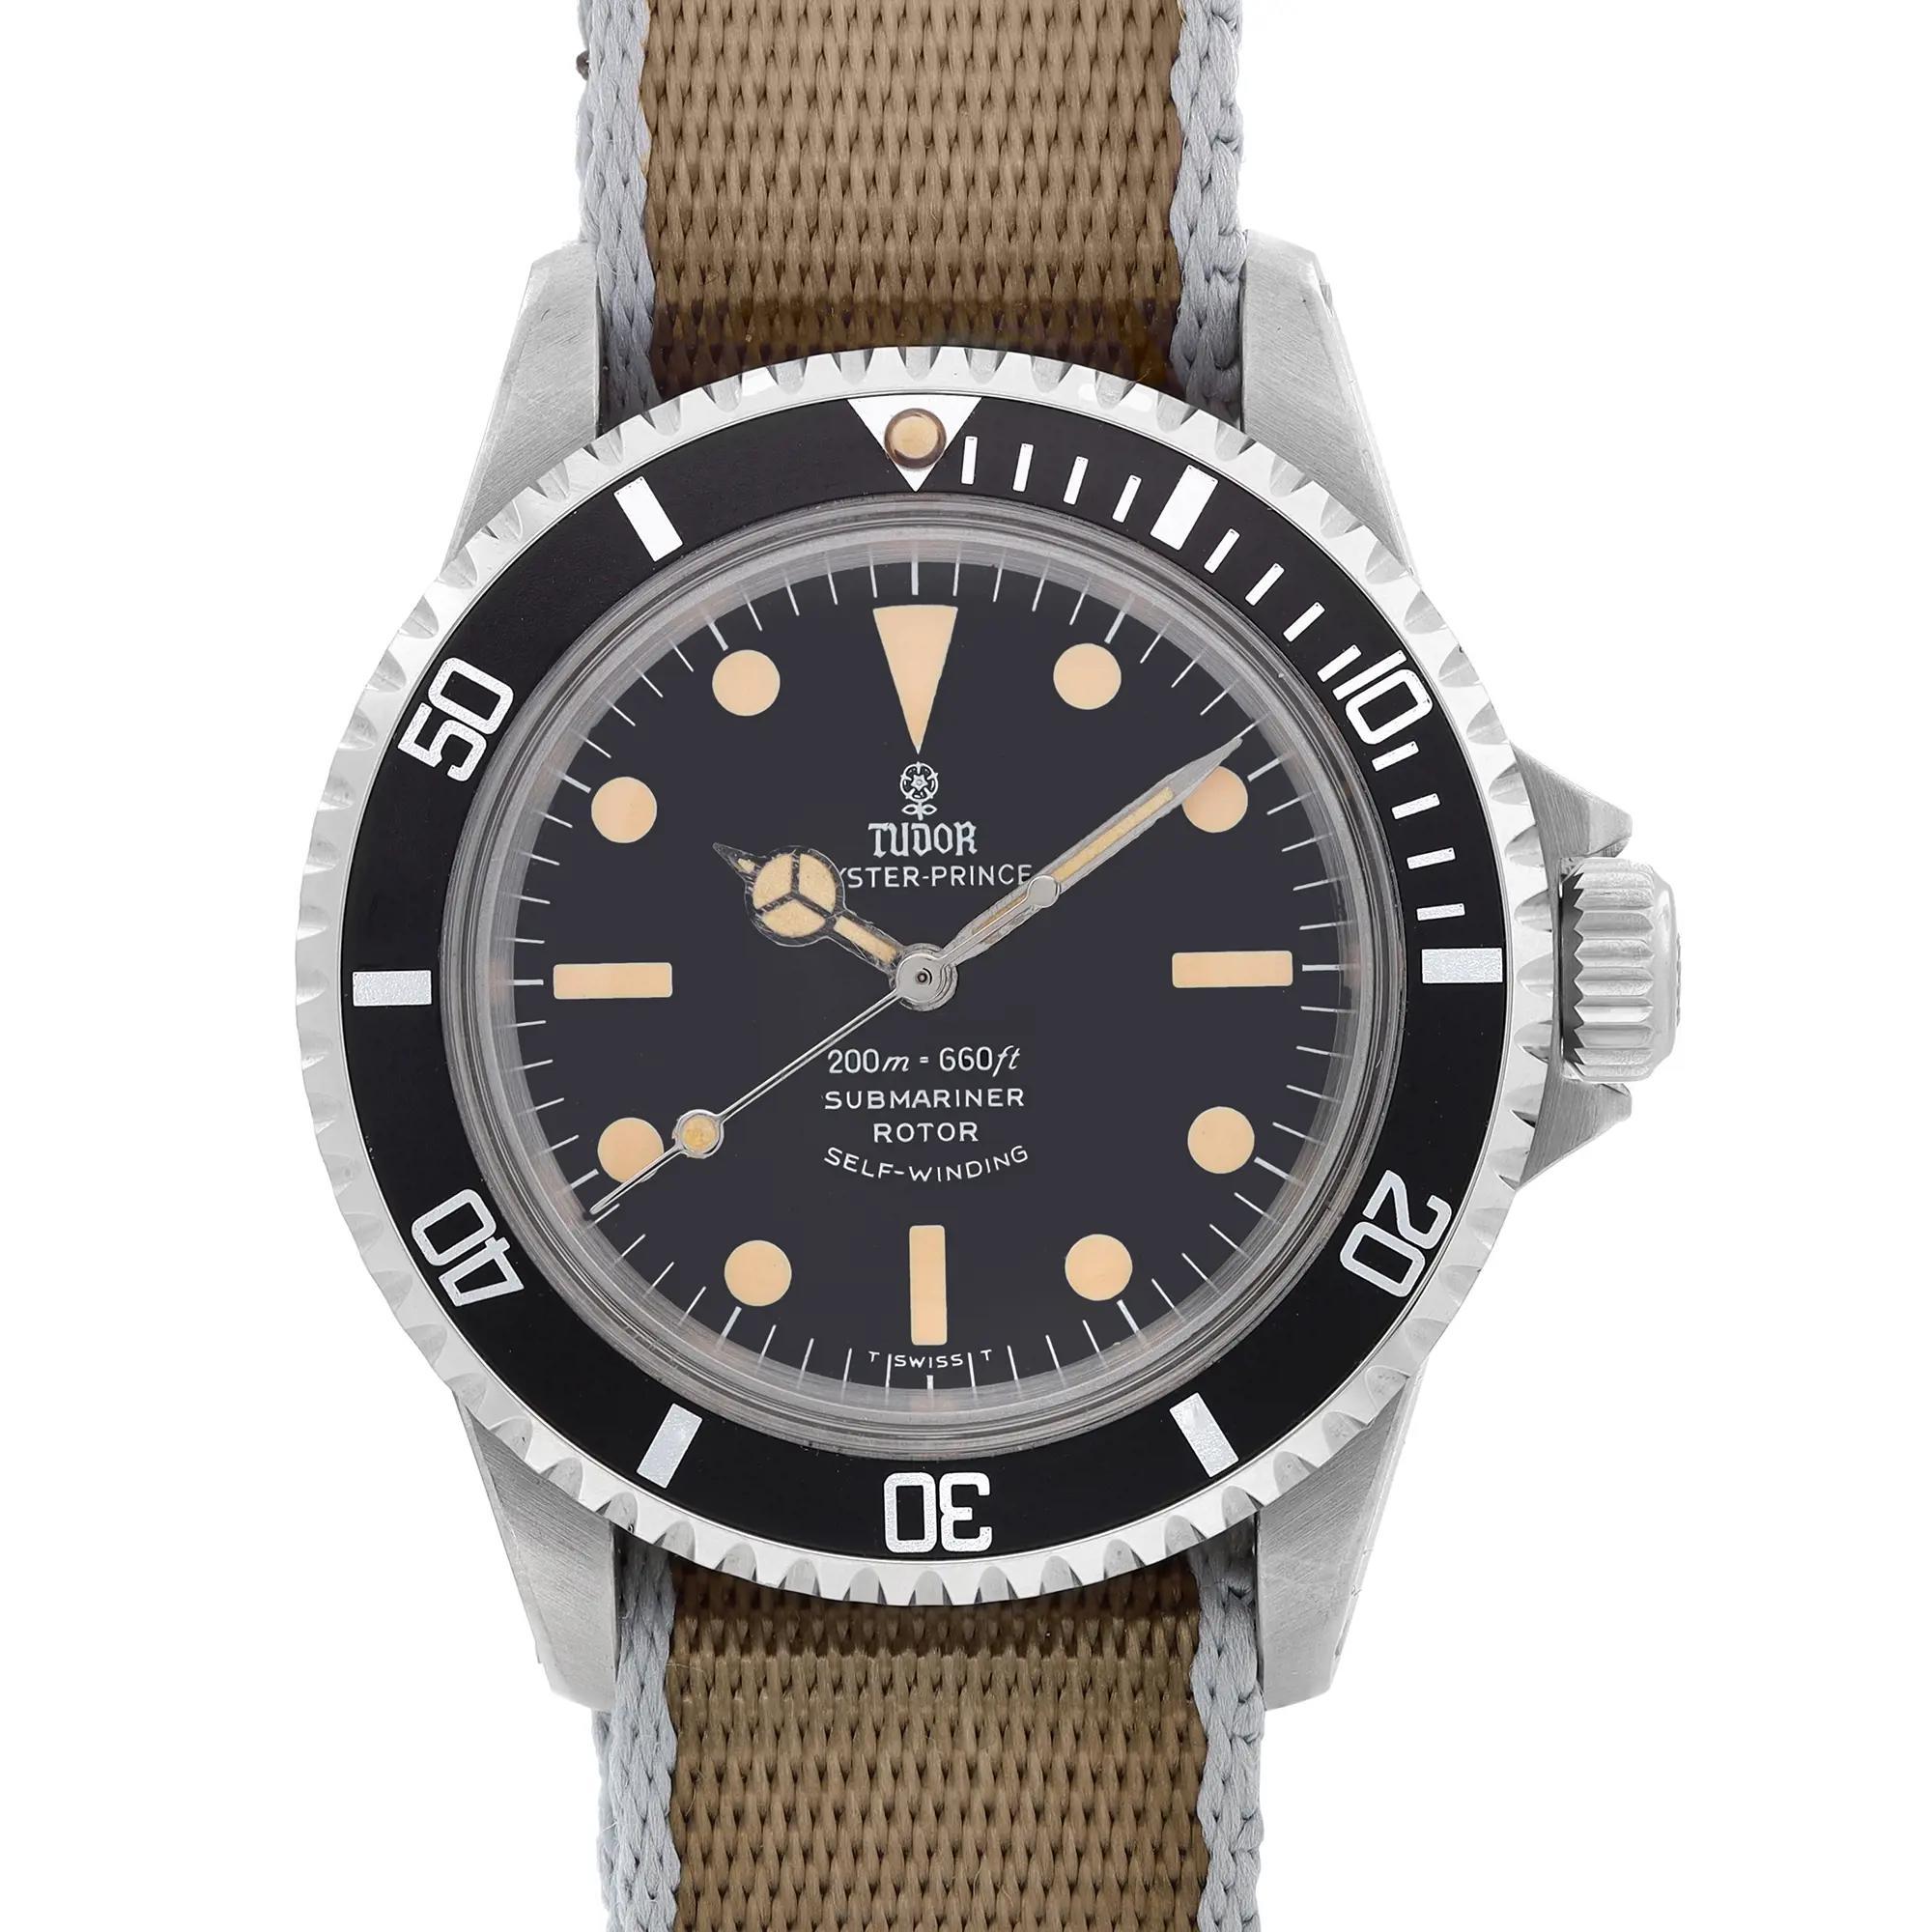 The dial is a Reprinted dial and has an aftermarket strap.

 Brand: TUDOR  Type: Wristwatch  Department: Men  Model Number: 701670  Country/Region of Manufacture: Switzerland  Style: Classic  Model: Tudor Submariner  Vintage: No  Movement: